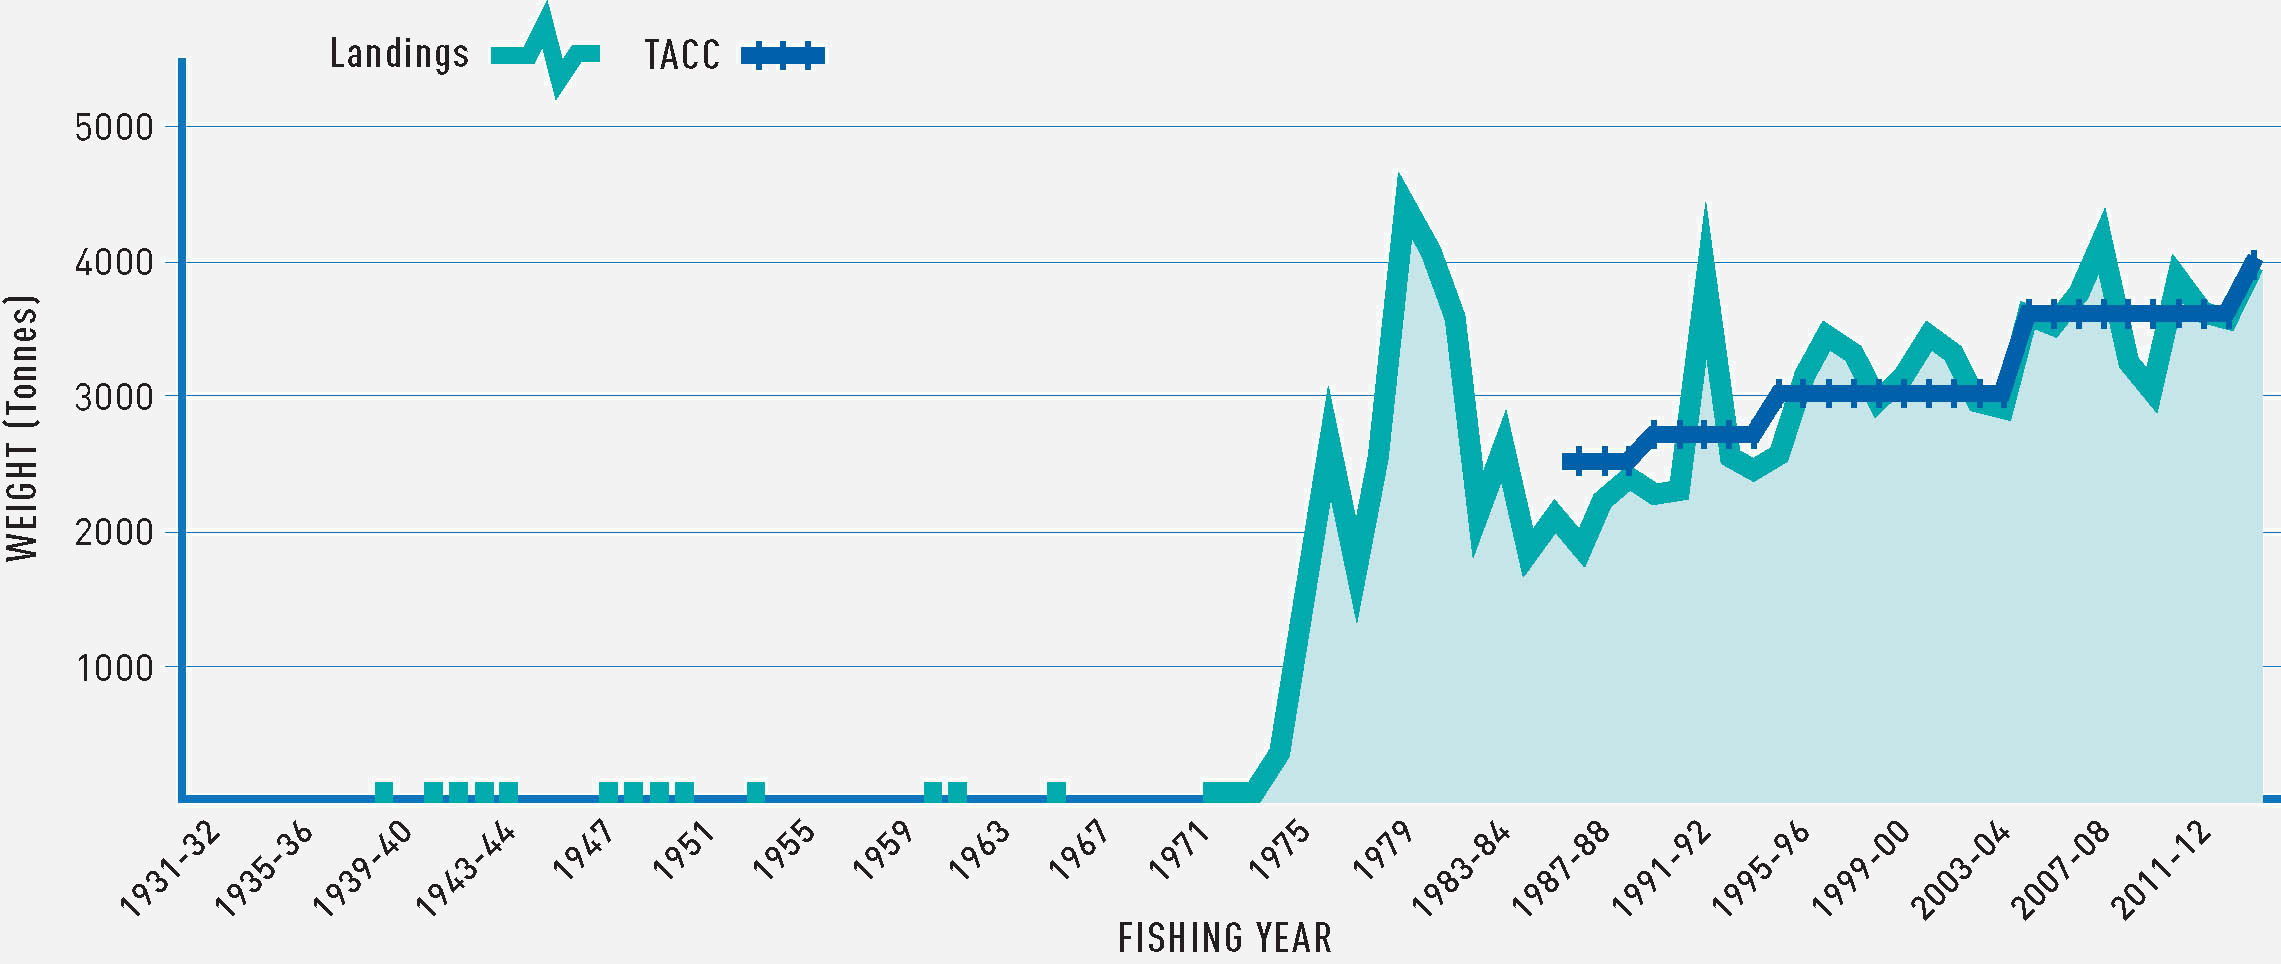 Reported commercial landings and total allowable commercial catch for Ling stocks, LIN 1 (Southland)